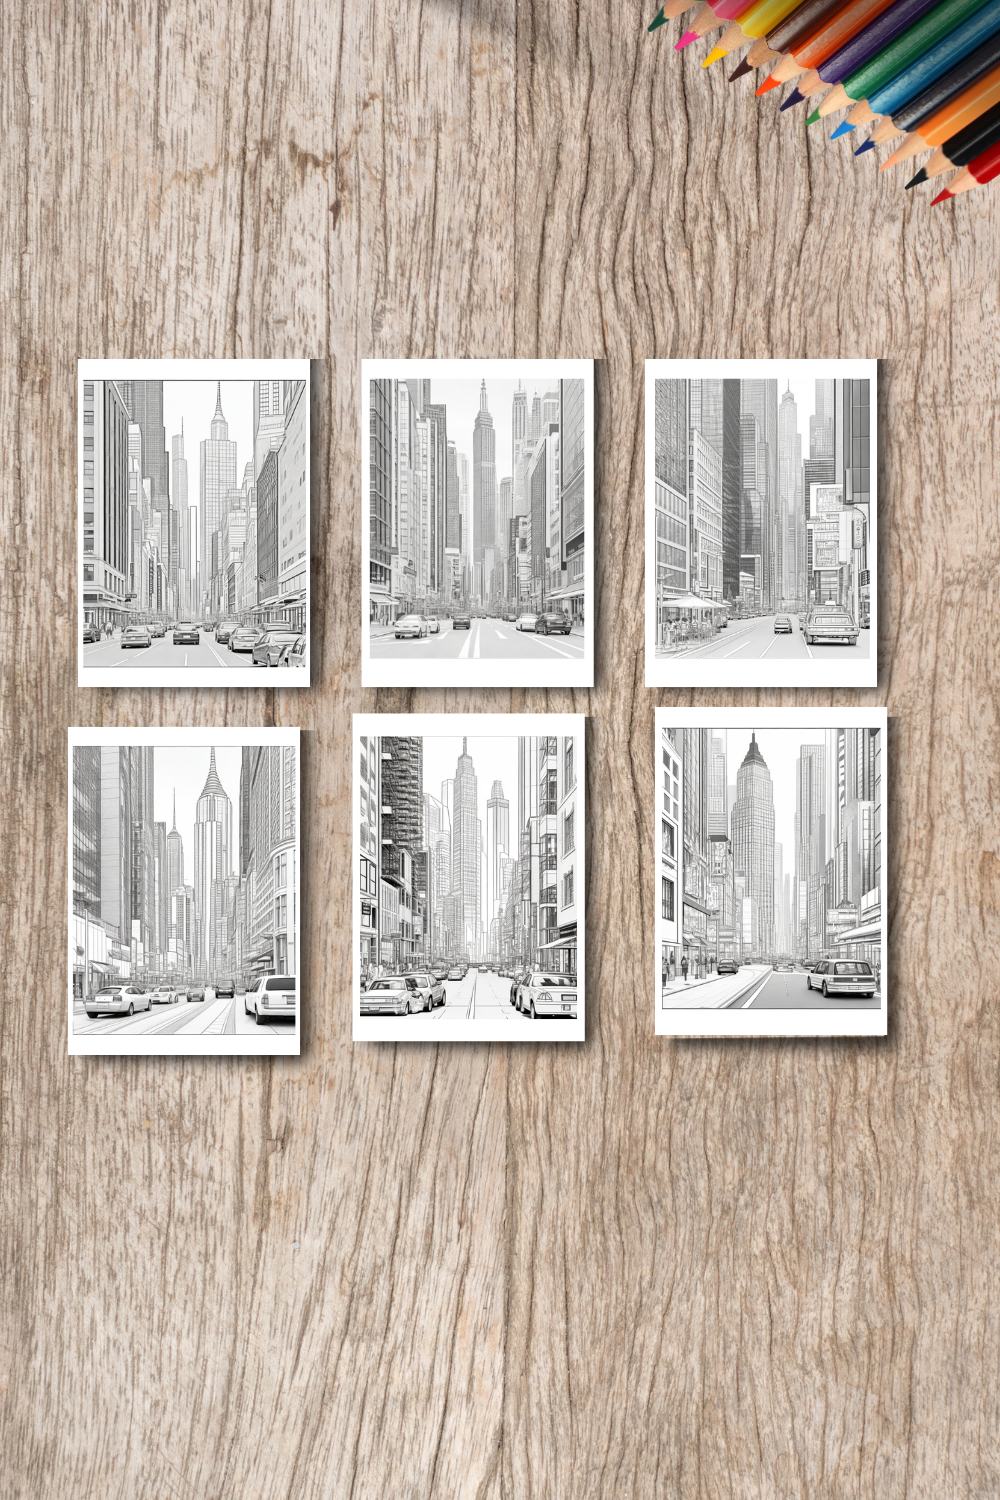 A cityscape with skyscrapers and a busy street scene coloring page 5 pinterest preview image.